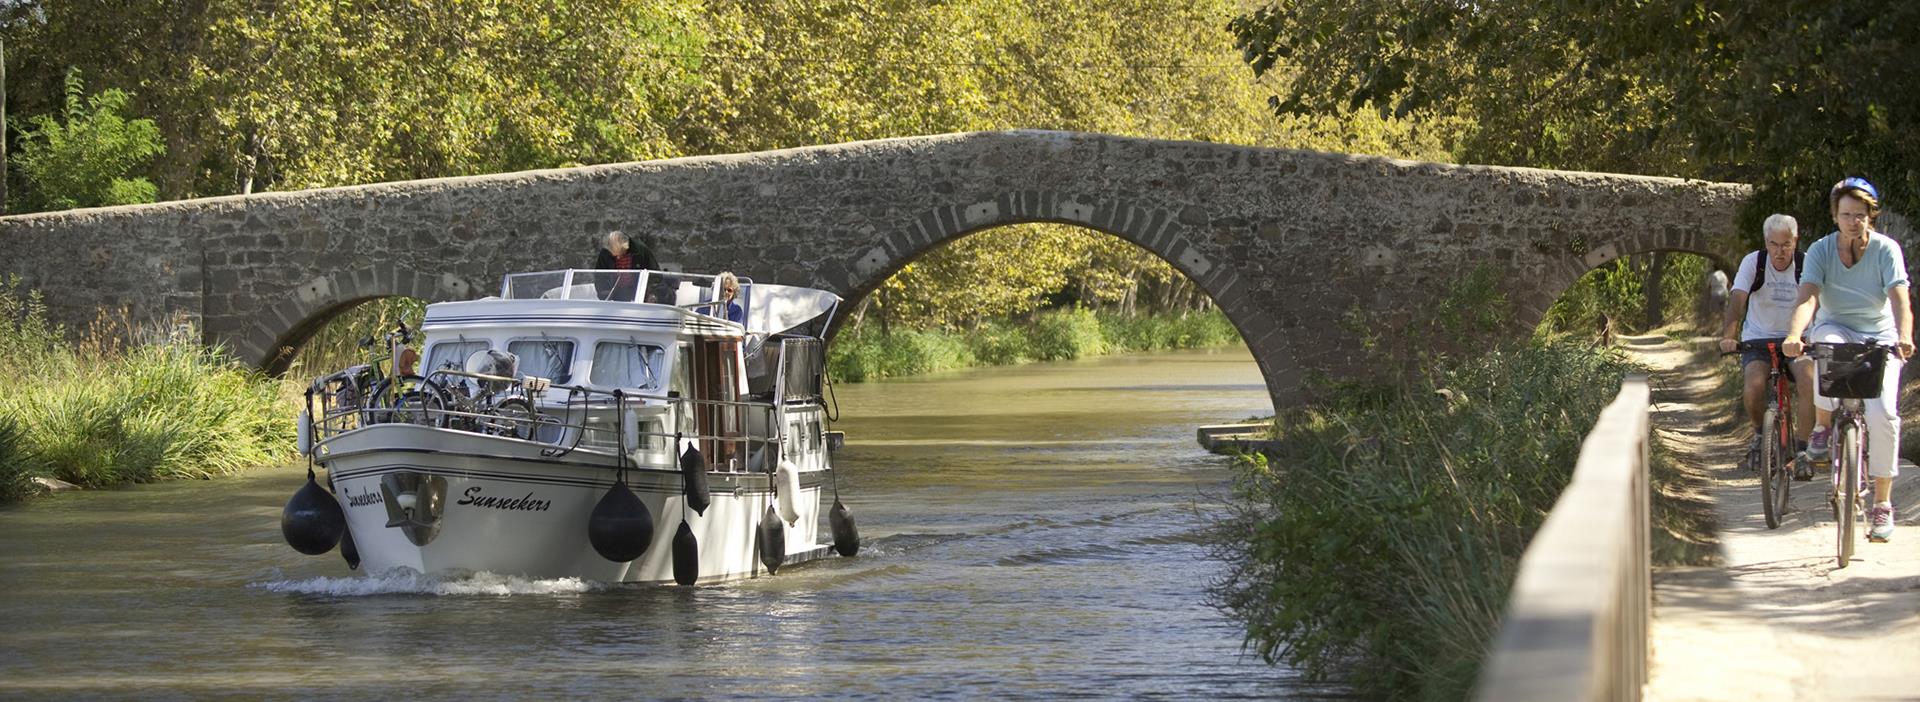 Boat trips on the Canal du Midi